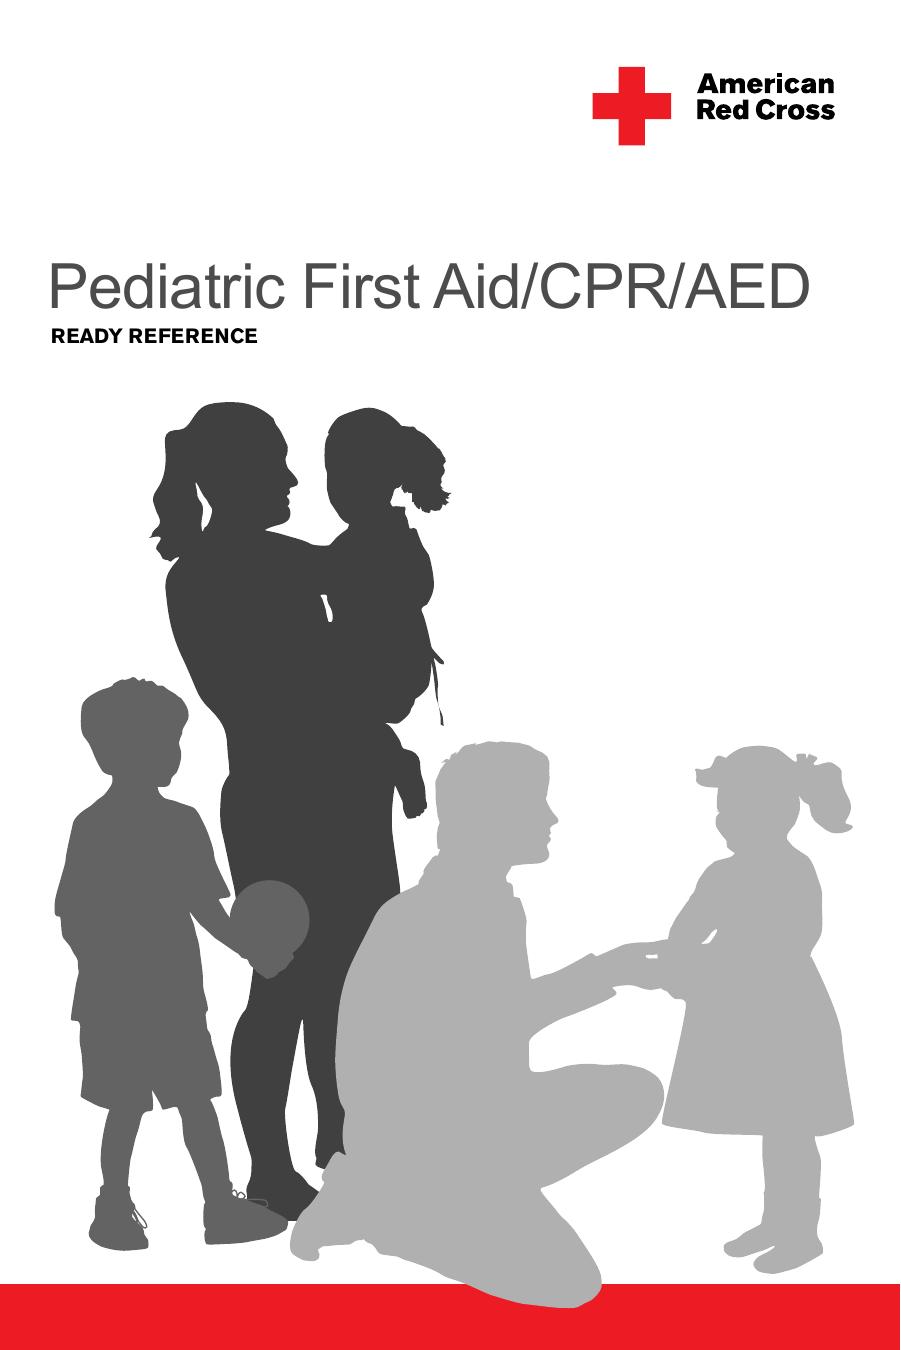 Pediatric First Aid CPR AED 2011